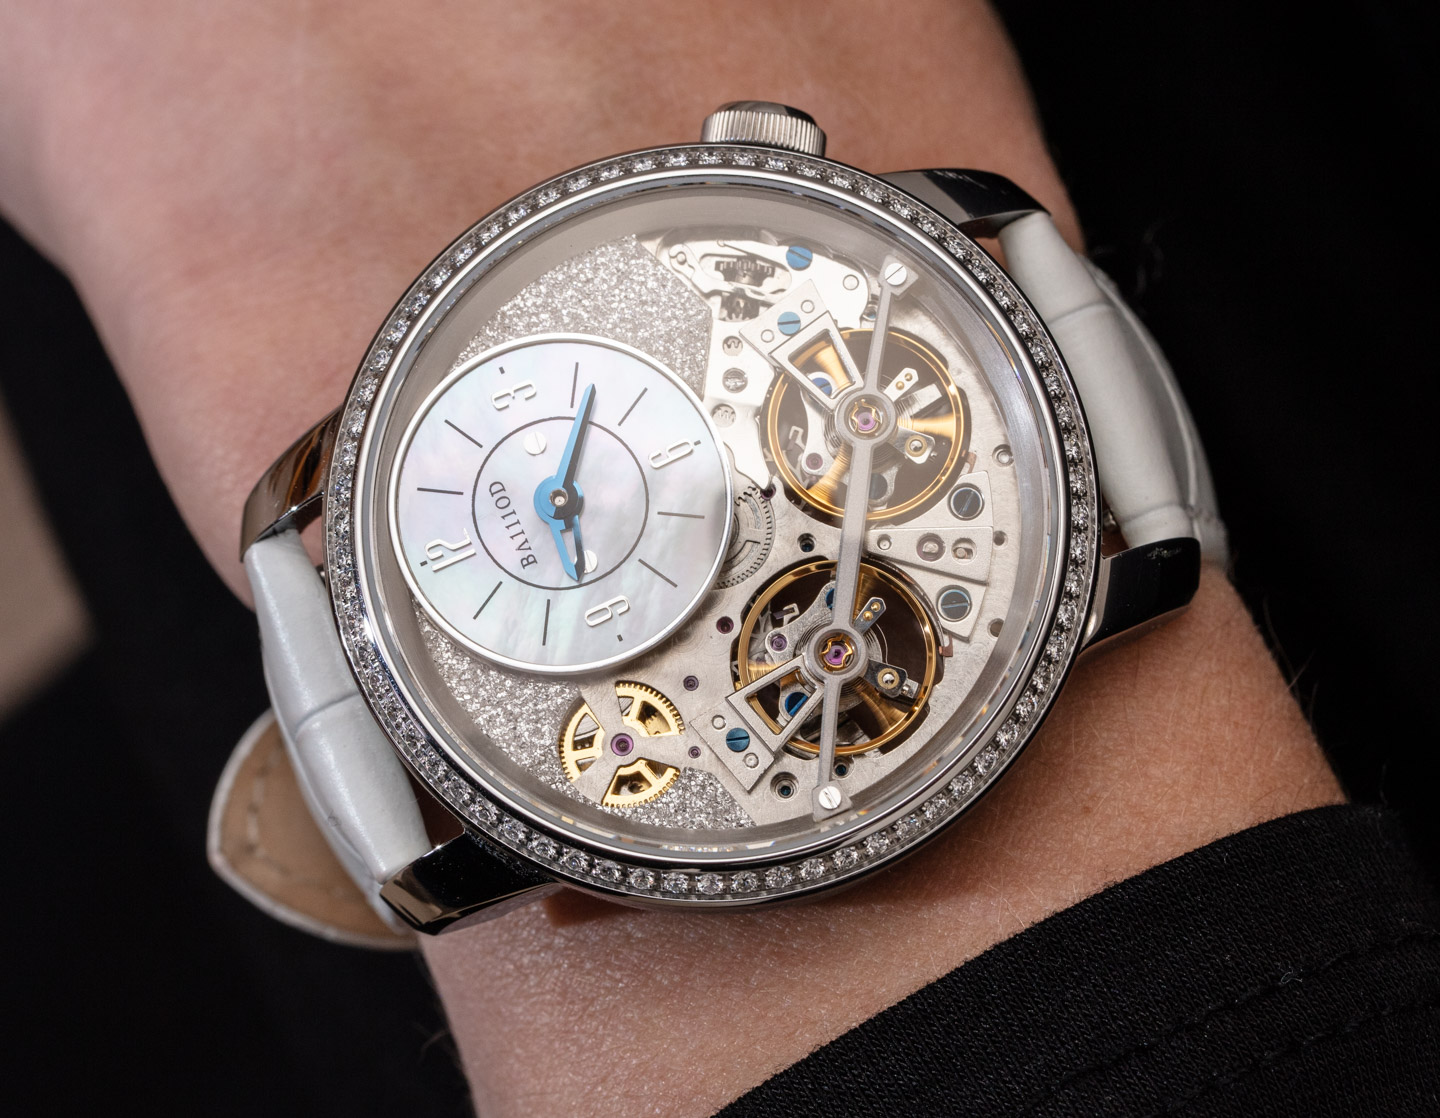 Hands-On: BA111OD Chapter 2 Diamonds Collection Watch